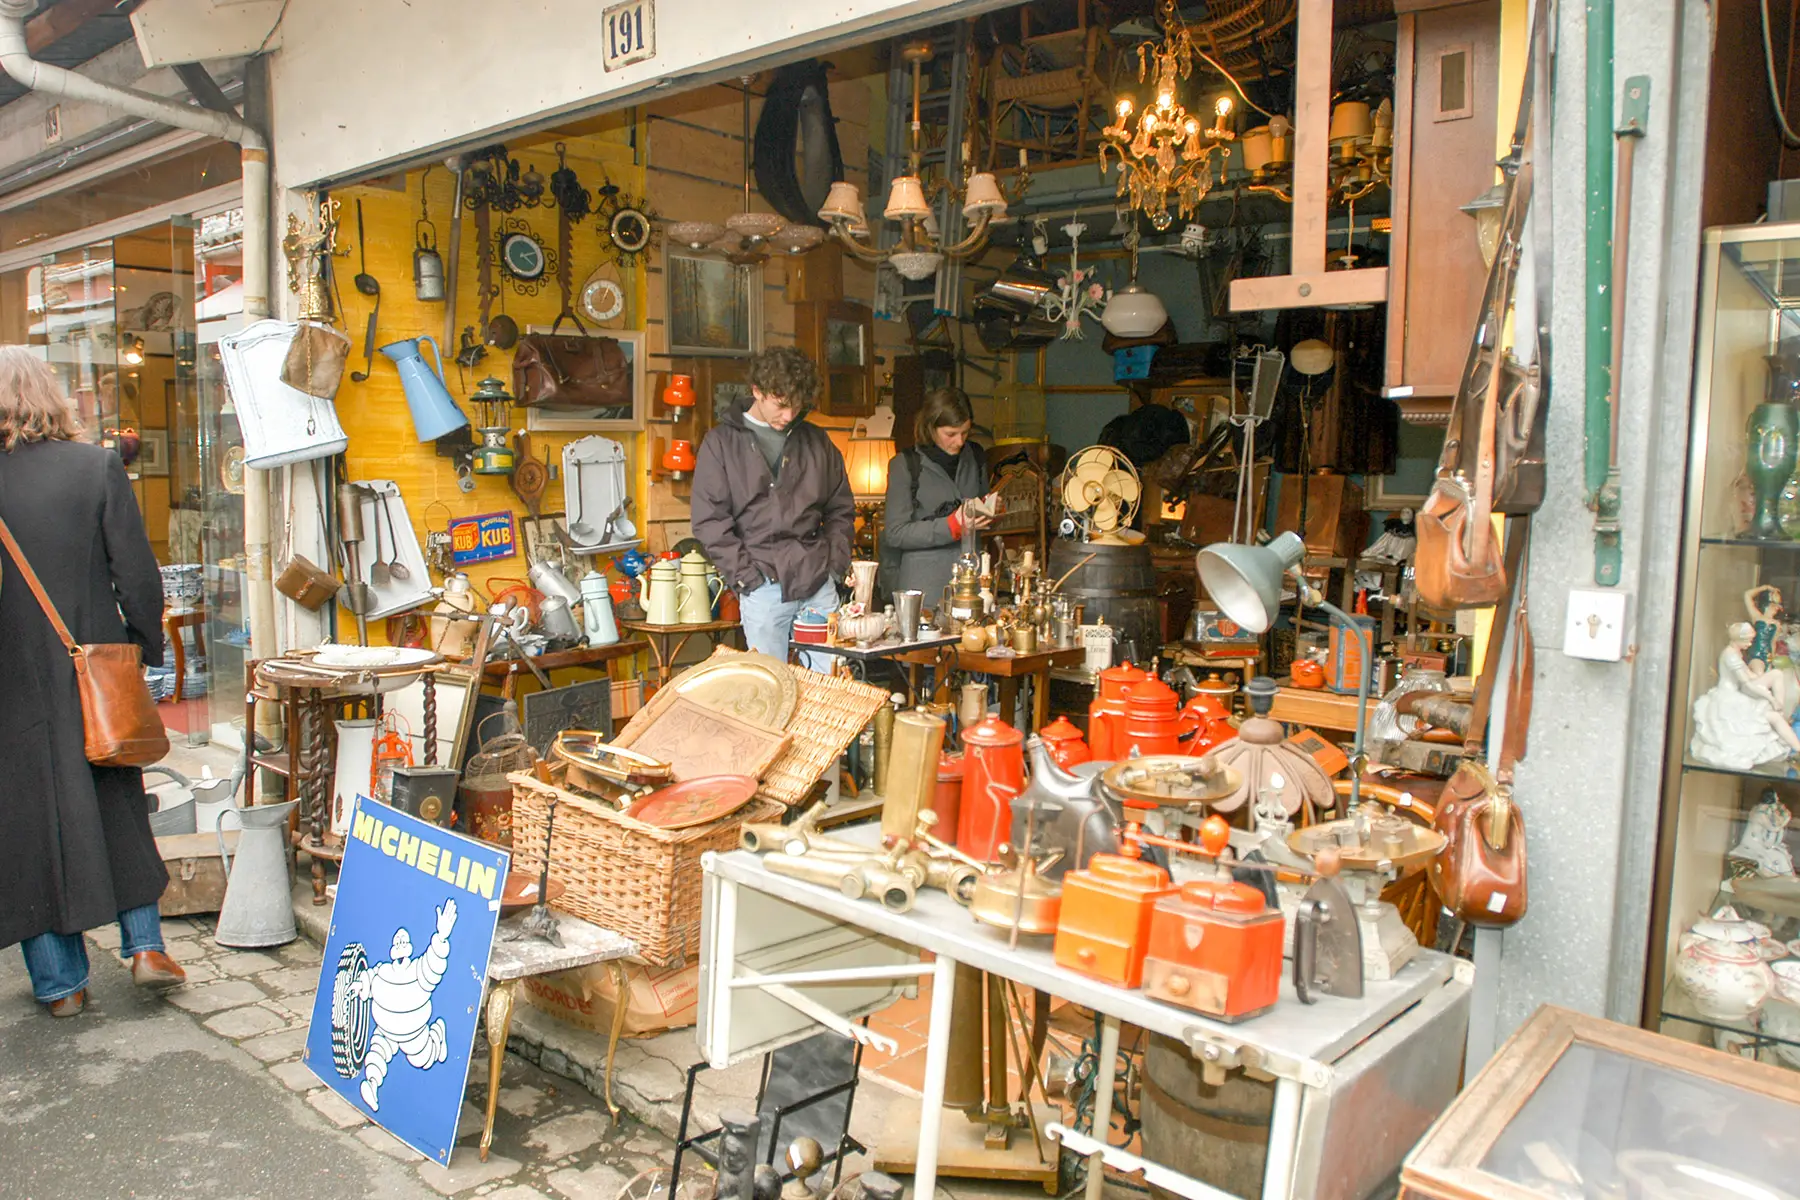 People at a flea market in Clignancourt